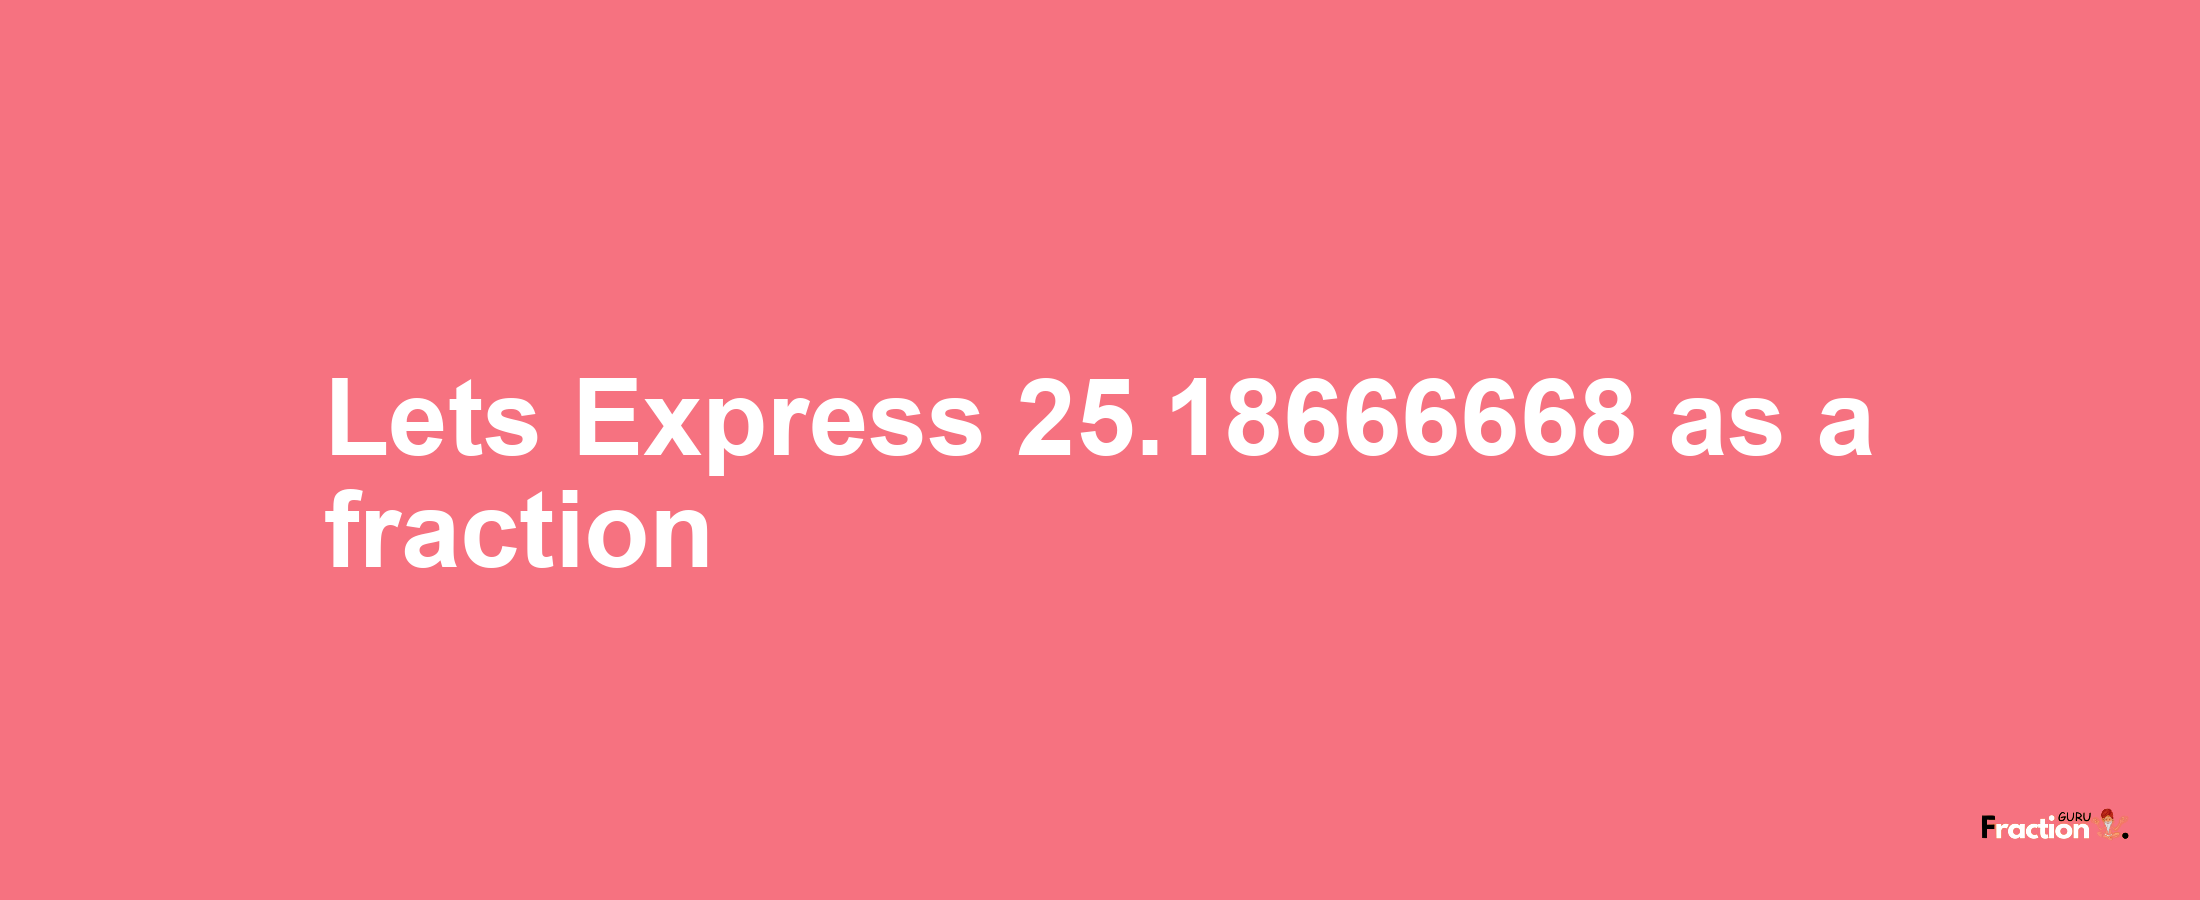 Lets Express 25.18666668 as afraction